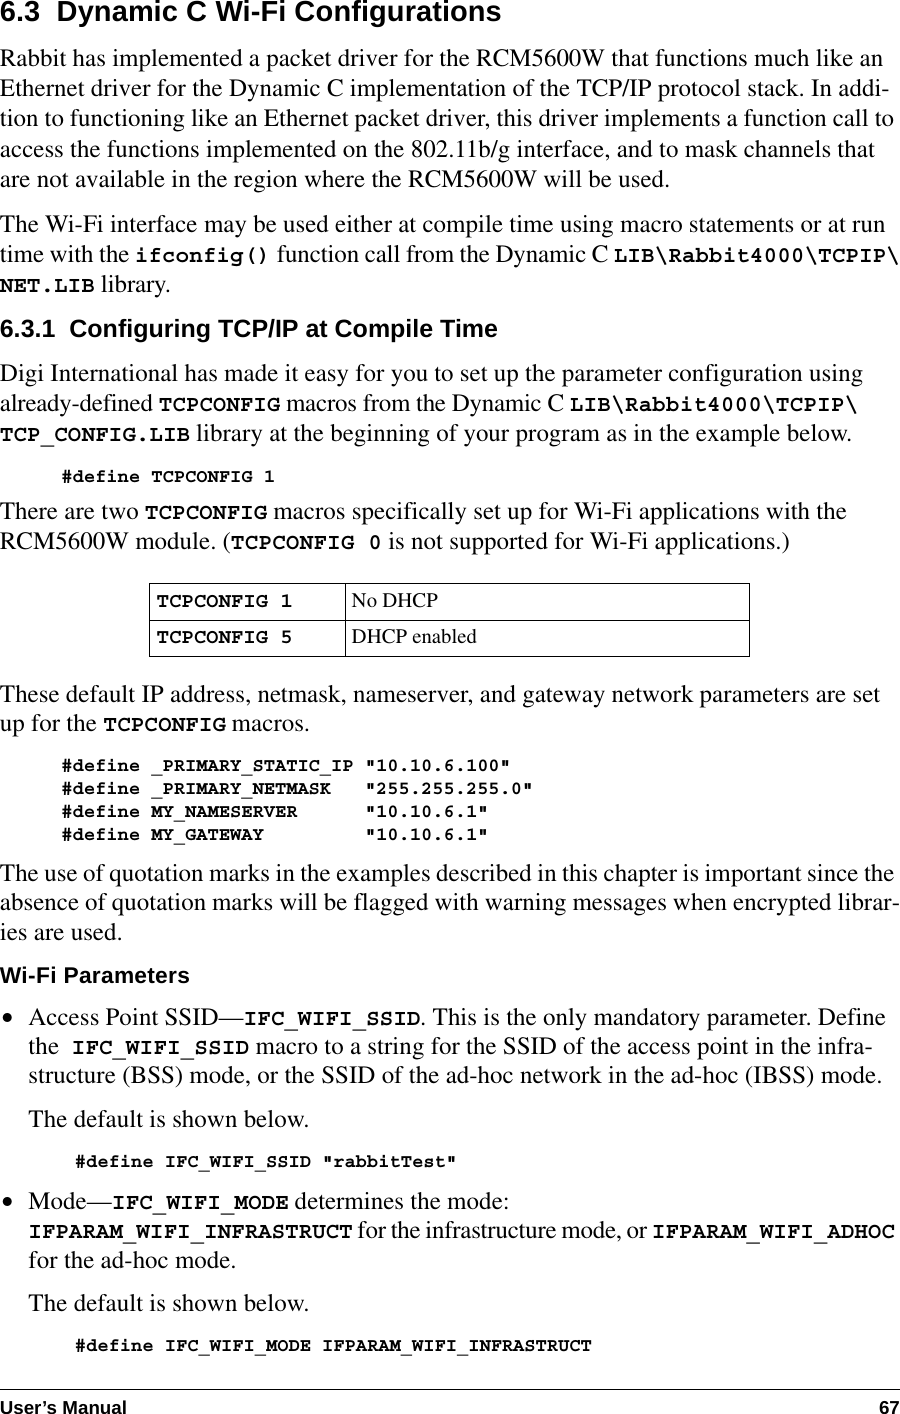 User’s Manual 676.3  Dynamic C Wi-Fi ConfigurationsRabbit has implemented a packet driver for the RCM5600W that functions much like an Ethernet driver for the Dynamic C implementation of the TCP/IP protocol stack. In addi-tion to functioning like an Ethernet packet driver, this driver implements a function call to access the functions implemented on the 802.11b/g interface, and to mask channels that are not available in the region where the RCM5600W will be used.The Wi-Fi interface may be used either at compile time using macro statements or at run time with the ifconfig() function call from the Dynamic C LIB\Rabbit4000\TCPIP\NET.LIB library.6.3.1  Configuring TCP/IP at Compile TimeDigi International has made it easy for you to set up the parameter configuration using already-defined TCPCONFIG macros from the Dynamic C LIB\Rabbit4000\TCPIP\TCP_CONFIG.LIB library at the beginning of your program as in the example below.#define TCPCONFIG 1There are two TCPCONFIG macros specifically set up for Wi-Fi applications with the RCM5600W module. (TCPCONFIG 0 is not supported for Wi-Fi applications.)These default IP address, netmask, nameserver, and gateway network parameters are set up for the TCPCONFIG macros.#define _PRIMARY_STATIC_IP &quot;10.10.6.100&quot;#define _PRIMARY_NETMASK   &quot;255.255.255.0&quot;#define MY_NAMESERVER      &quot;10.10.6.1&quot;#define MY_GATEWAY         &quot;10.10.6.1&quot;The use of quotation marks in the examples described in this chapter is important since the absence of quotation marks will be flagged with warning messages when encrypted librar-ies are used.Wi-Fi Parameters•Access Point SSID—IFC_WIFI_SSID. This is the only mandatory parameter. Define the  IFC_WIFI_SSID macro to a string for the SSID of the access point in the infra-structure (BSS) mode, or the SSID of the ad-hoc network in the ad-hoc (IBSS) mode.The default is shown below.#define IFC_WIFI_SSID &quot;rabbitTest&quot;•Mode—IFC_WIFI_MODE determines the mode: IFPARAM_WIFI_INFRASTRUCT for the infrastructure mode, or IFPARAM_WIFI_ADHOC for the ad-hoc mode.The default is shown below.#define IFC_WIFI_MODE IFPARAM_WIFI_INFRASTRUCTTCPCONFIG 1No DHCPTCPCONFIG 5DHCP enabled